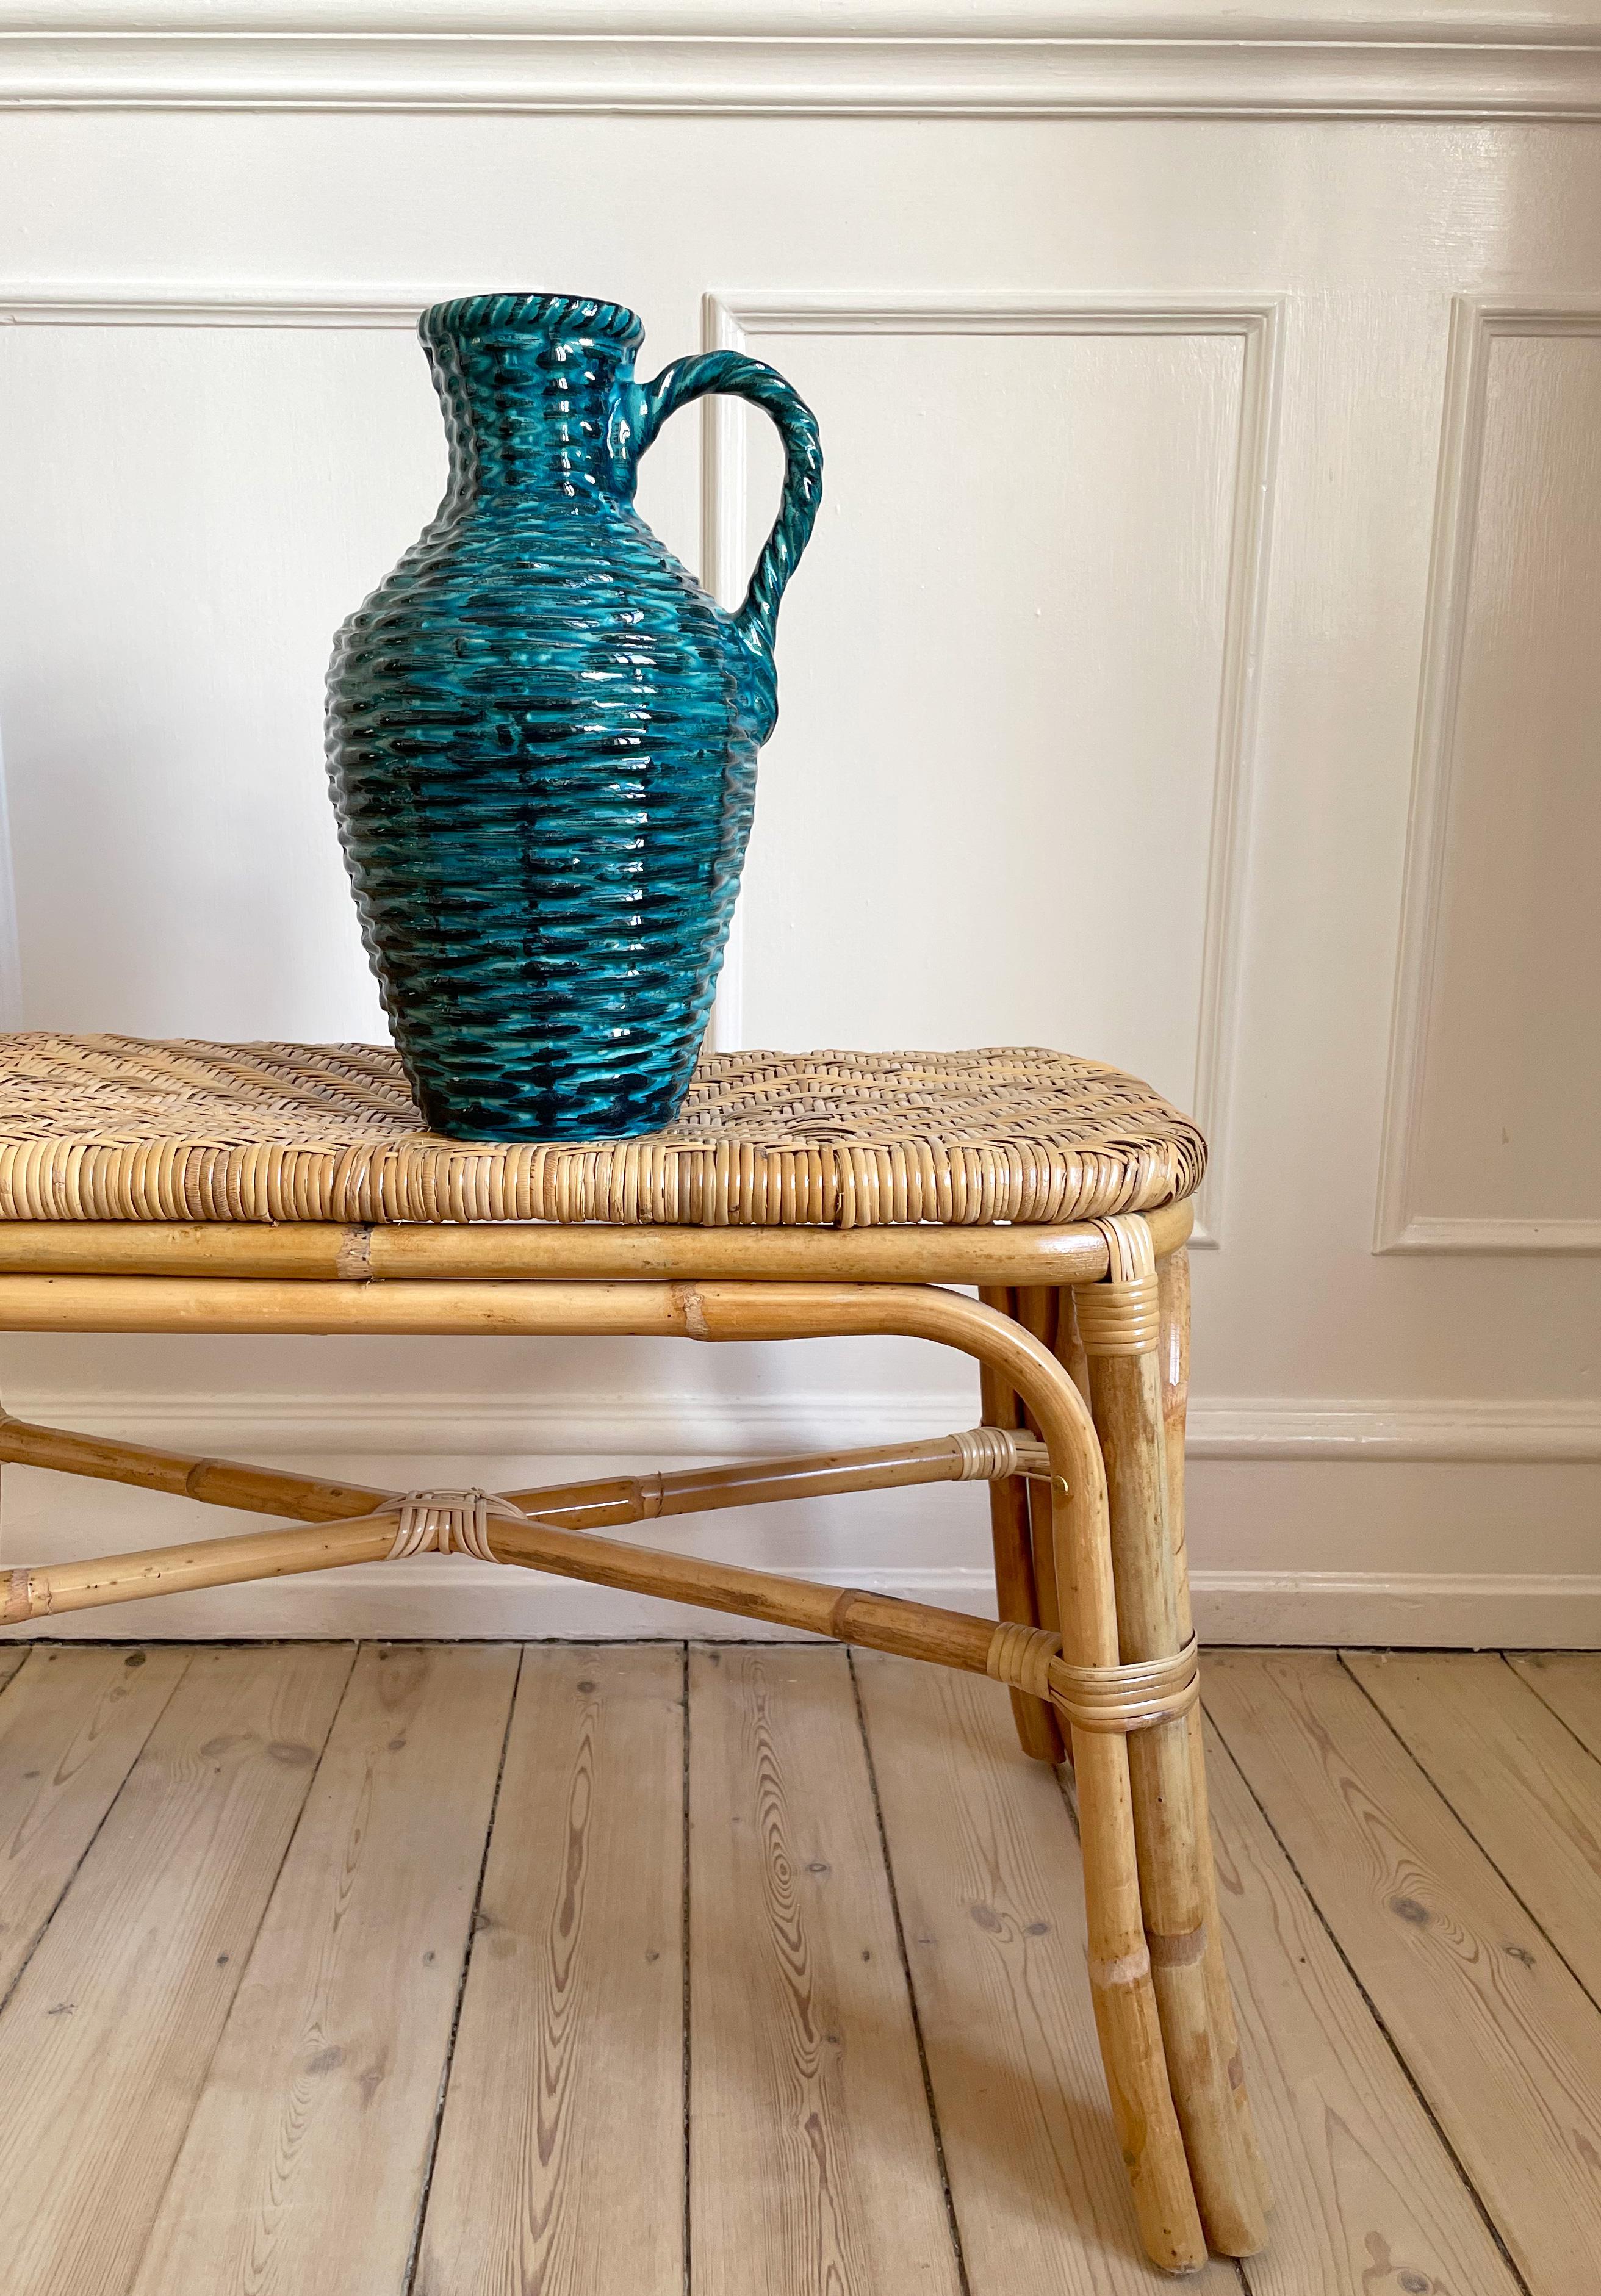 Large hand-painted petrol turquoise pastel blue and black glazed ceramic vase with visible brush strokes and unusual soft organic texture resembling interwoven rattan or bamboo. Braided top and handle. Dark caramel brown glaze on the inside.